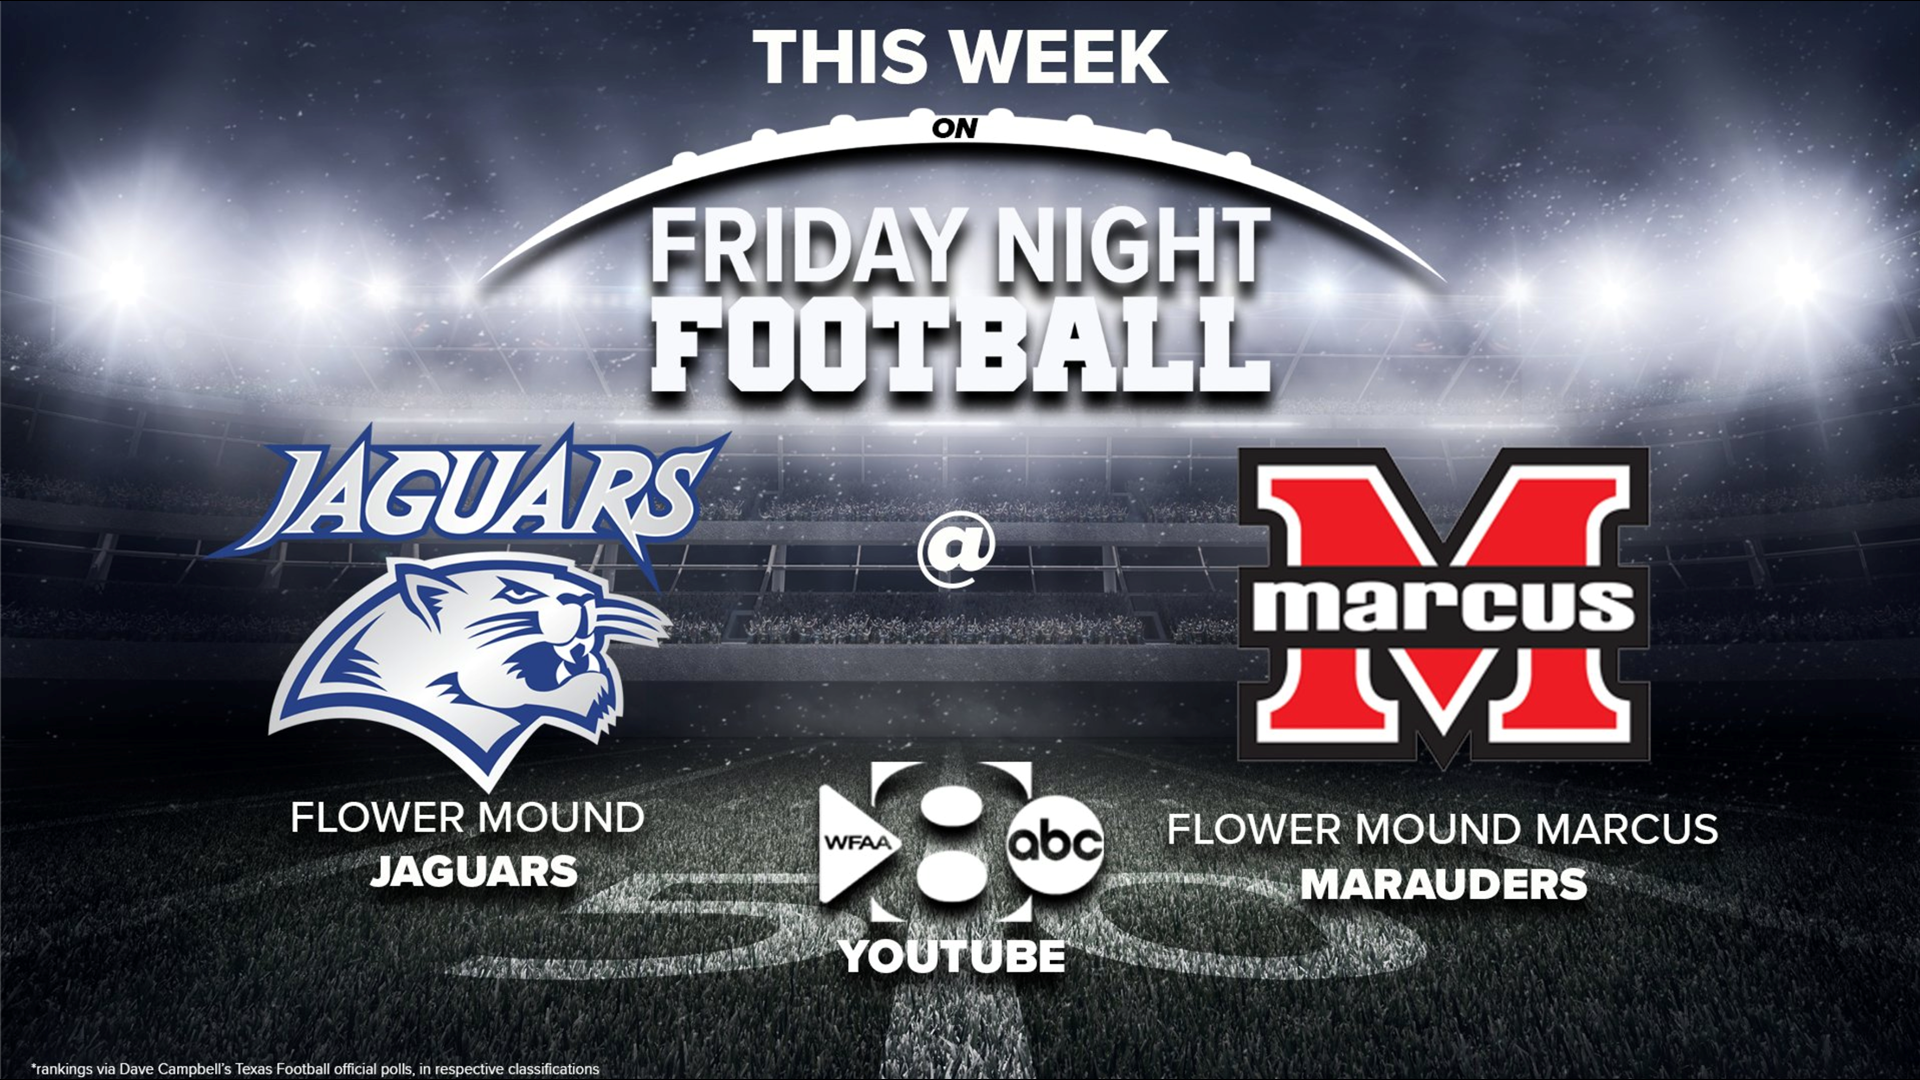 The Flower Mound Jags take on Flower Mound Marcus to decide town bragging rights for the next year.